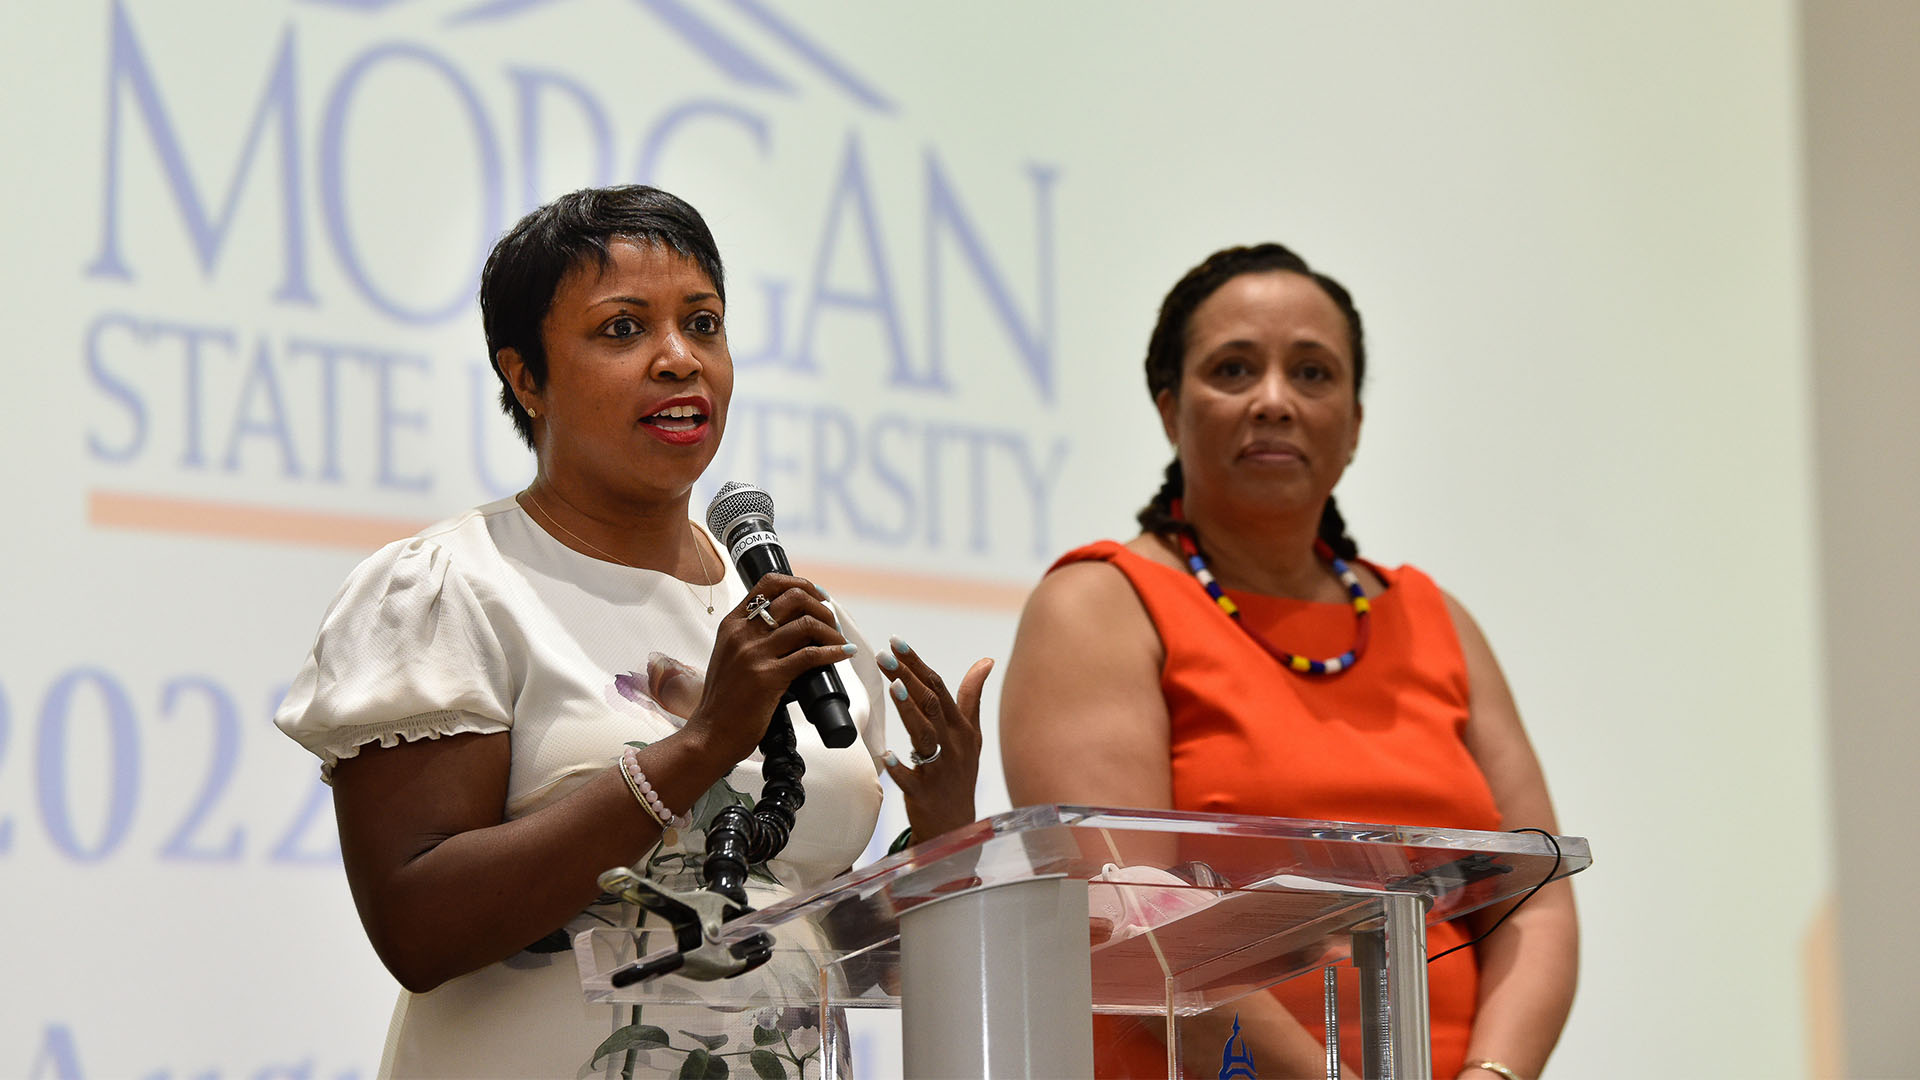 Drs. Patricia Williams-Lessane and Laura Dorsey-Elson